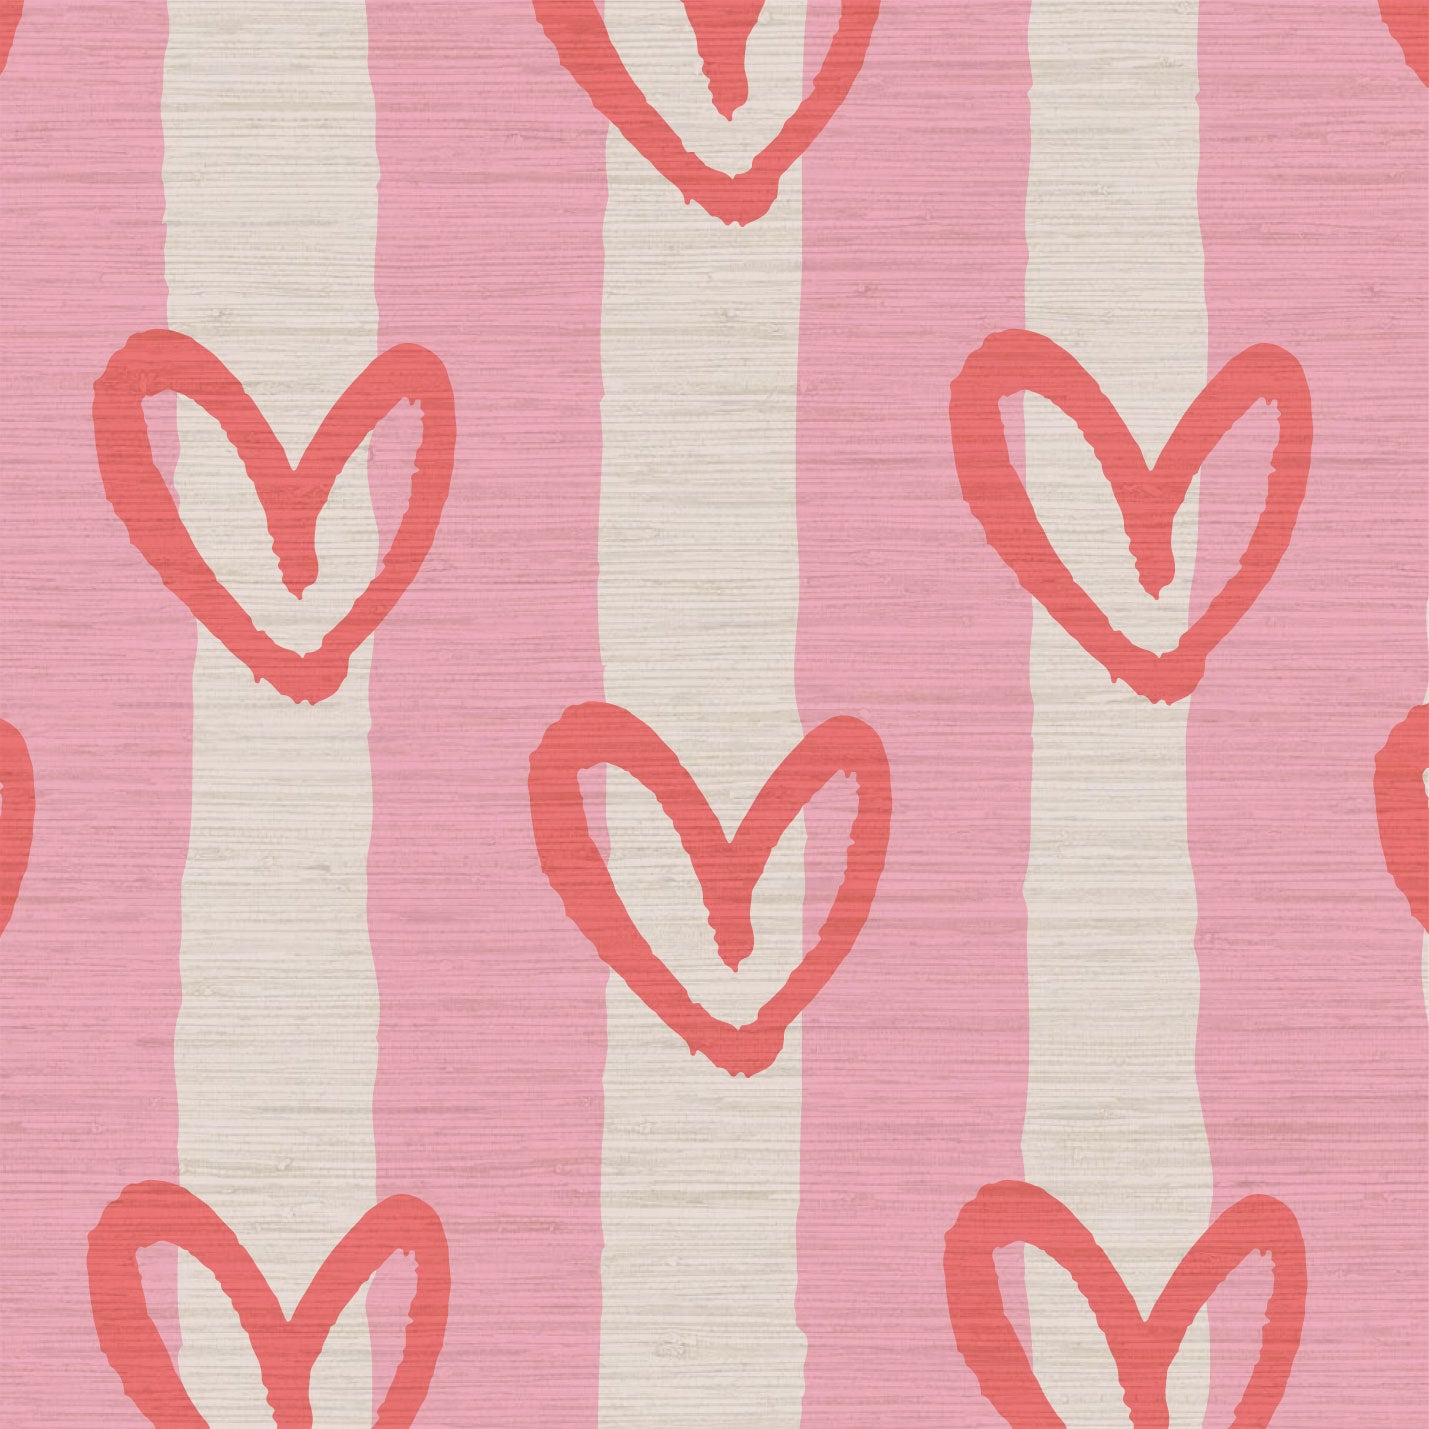 hearts vertical wide stripes house of shan collaboration kids playroom nursery Grasscloth wallpaper Natural Textured Eco-Friendly Non-toxic High-quality Sustainable Interior Design Bold Custom Tailor-made Retro chic Bold fun pink red white nursery girl bedroom